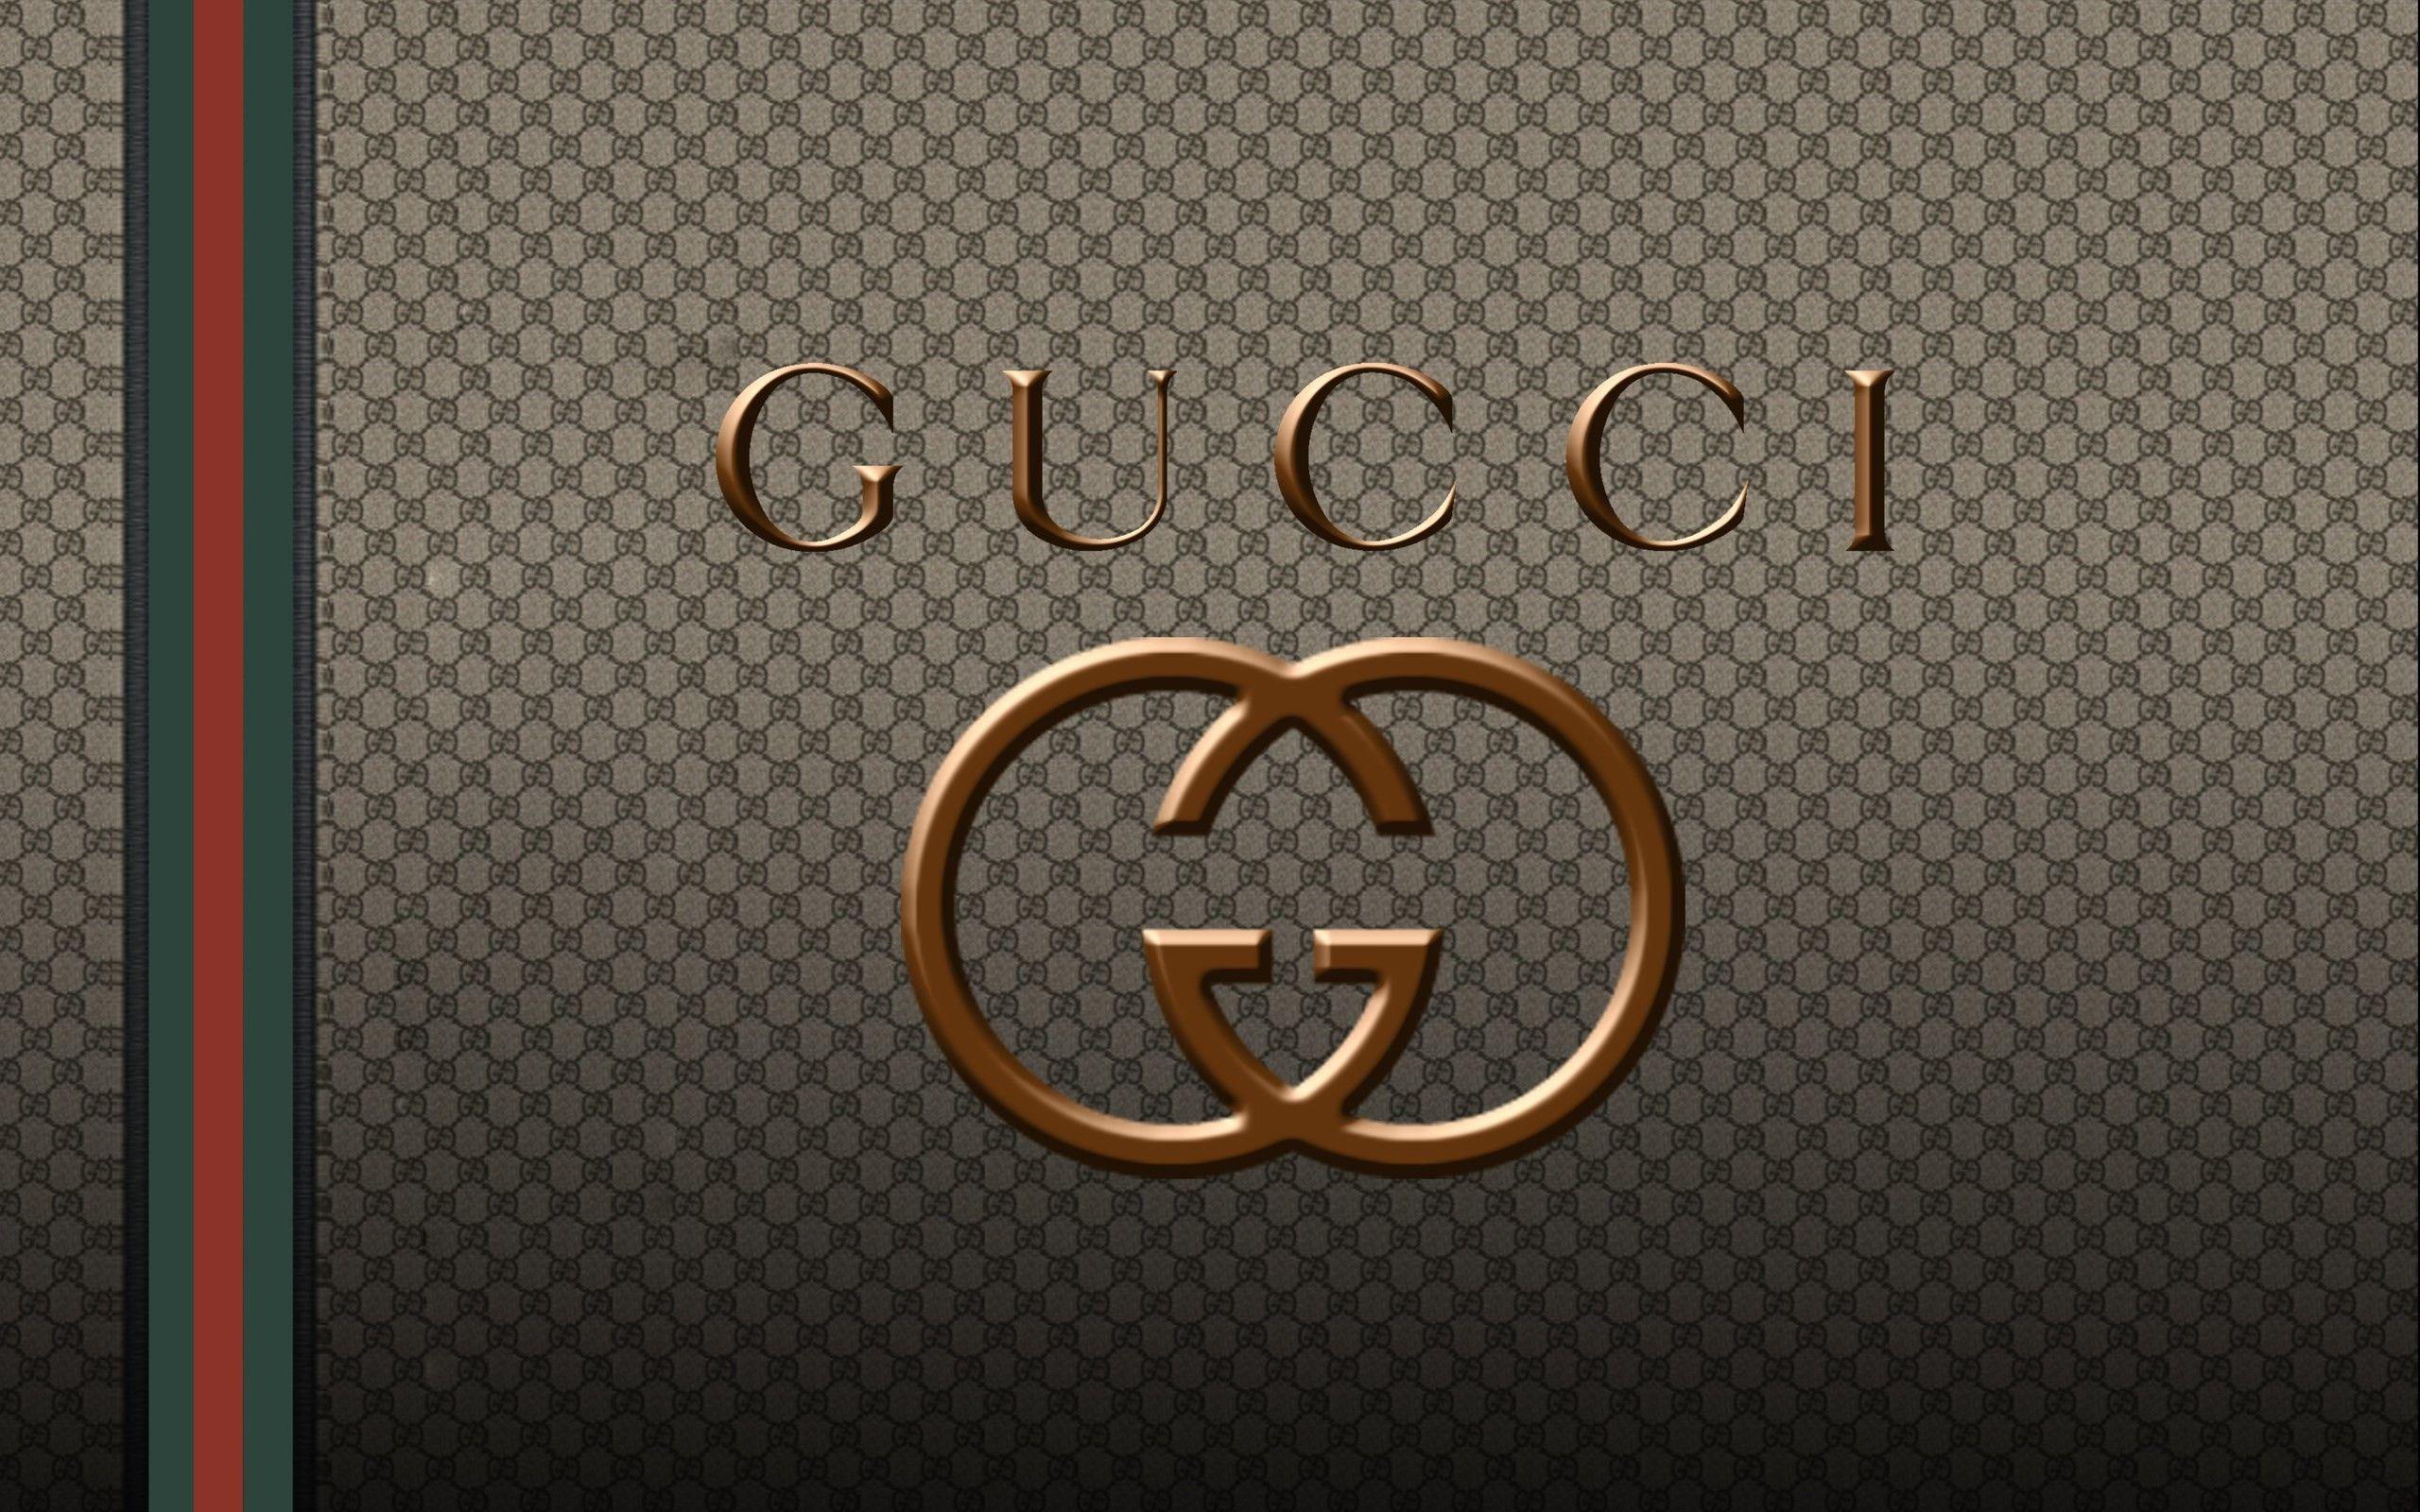 Cute Gucci Logo - 85+ Gucci Logo Wallpapers on WallpaperPlay